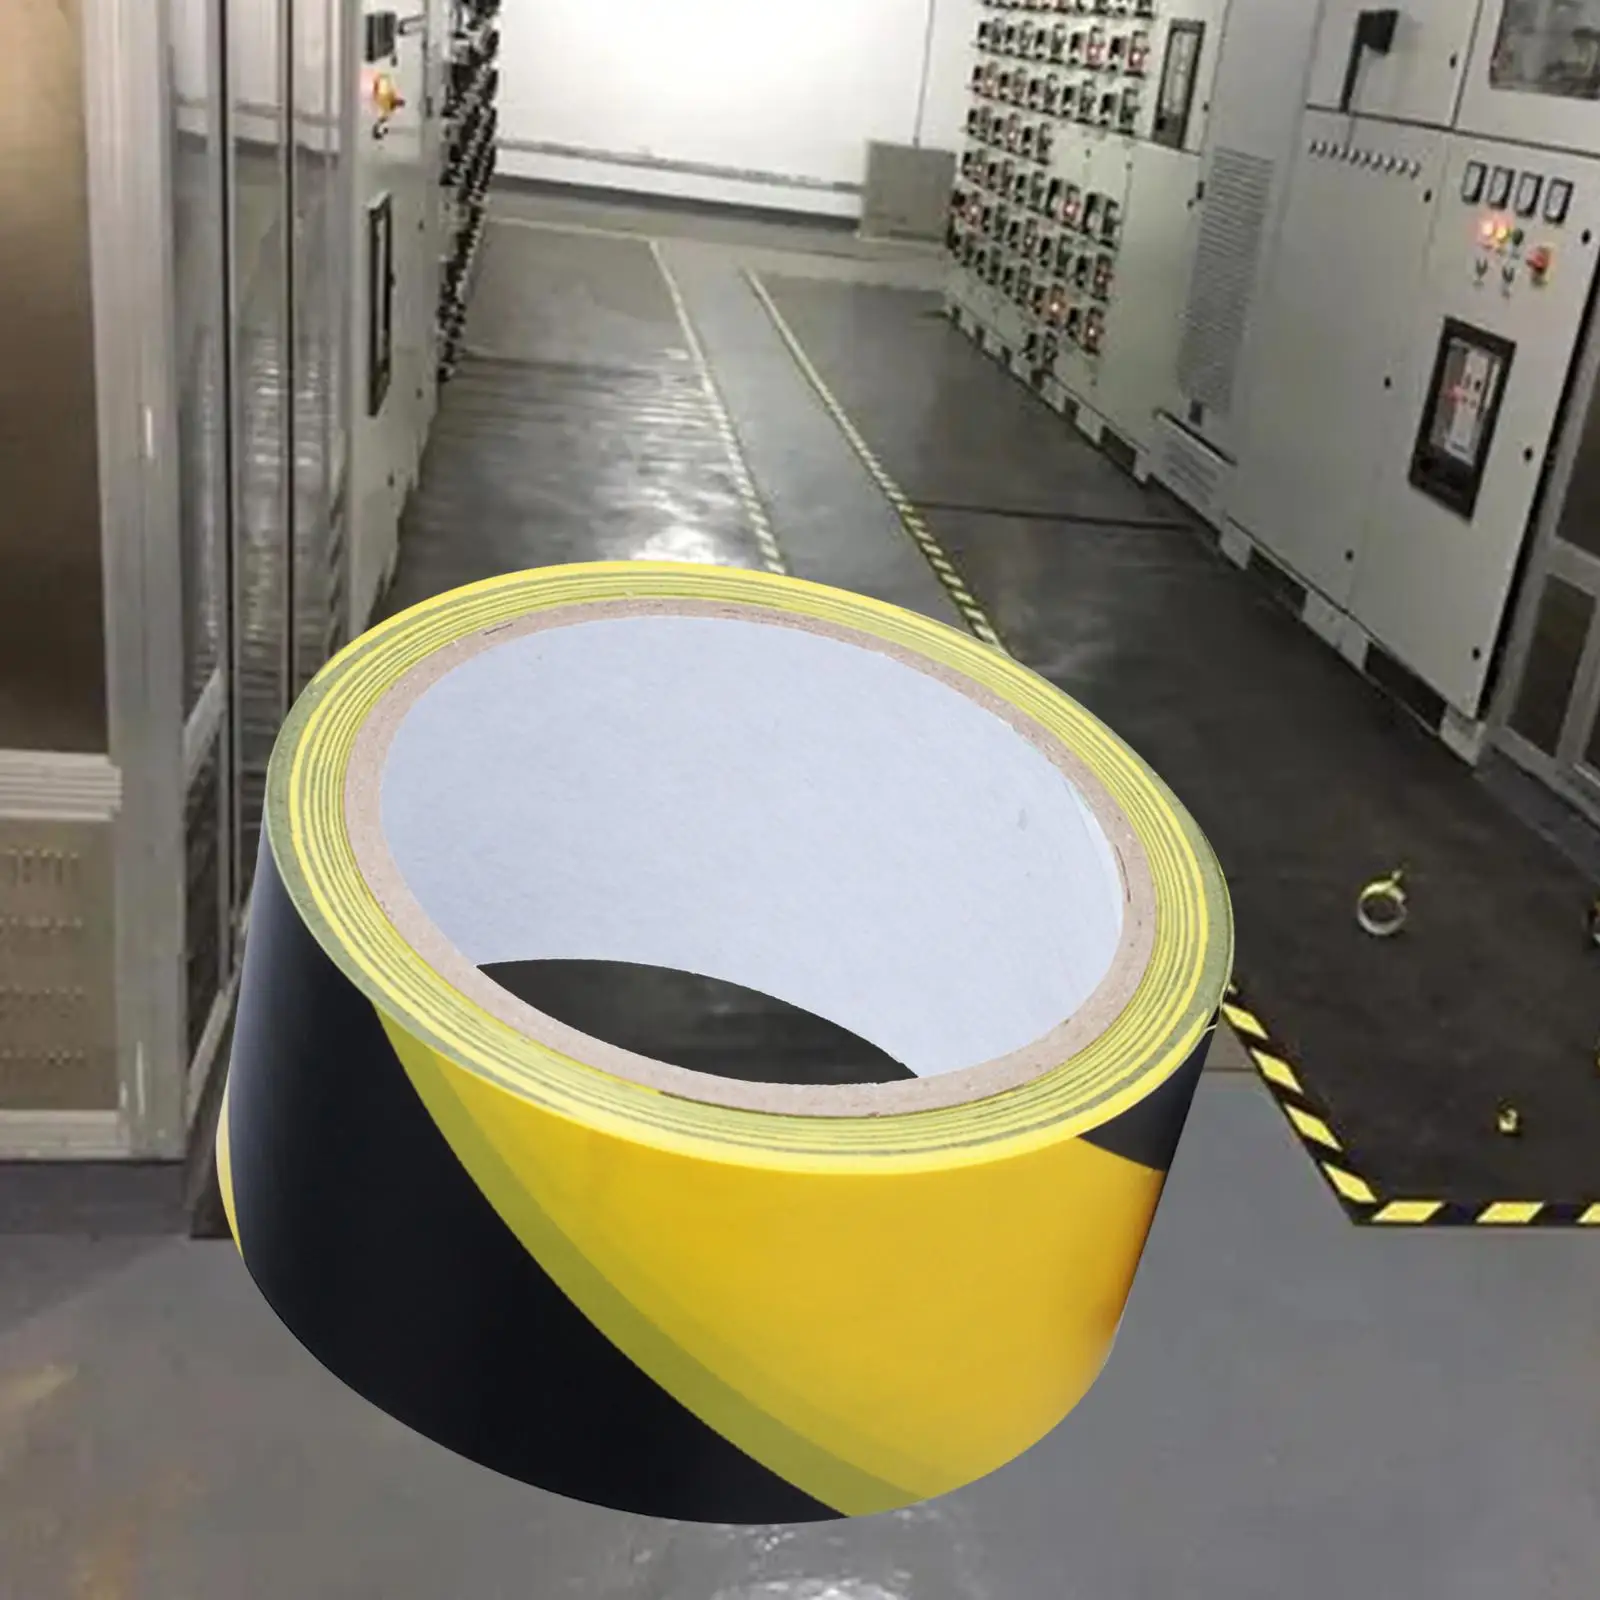 Warning Tape Identification Area PVC Hazard Warning Safety Stripe Tape for Equipment Stairs Factory Construction Pipes